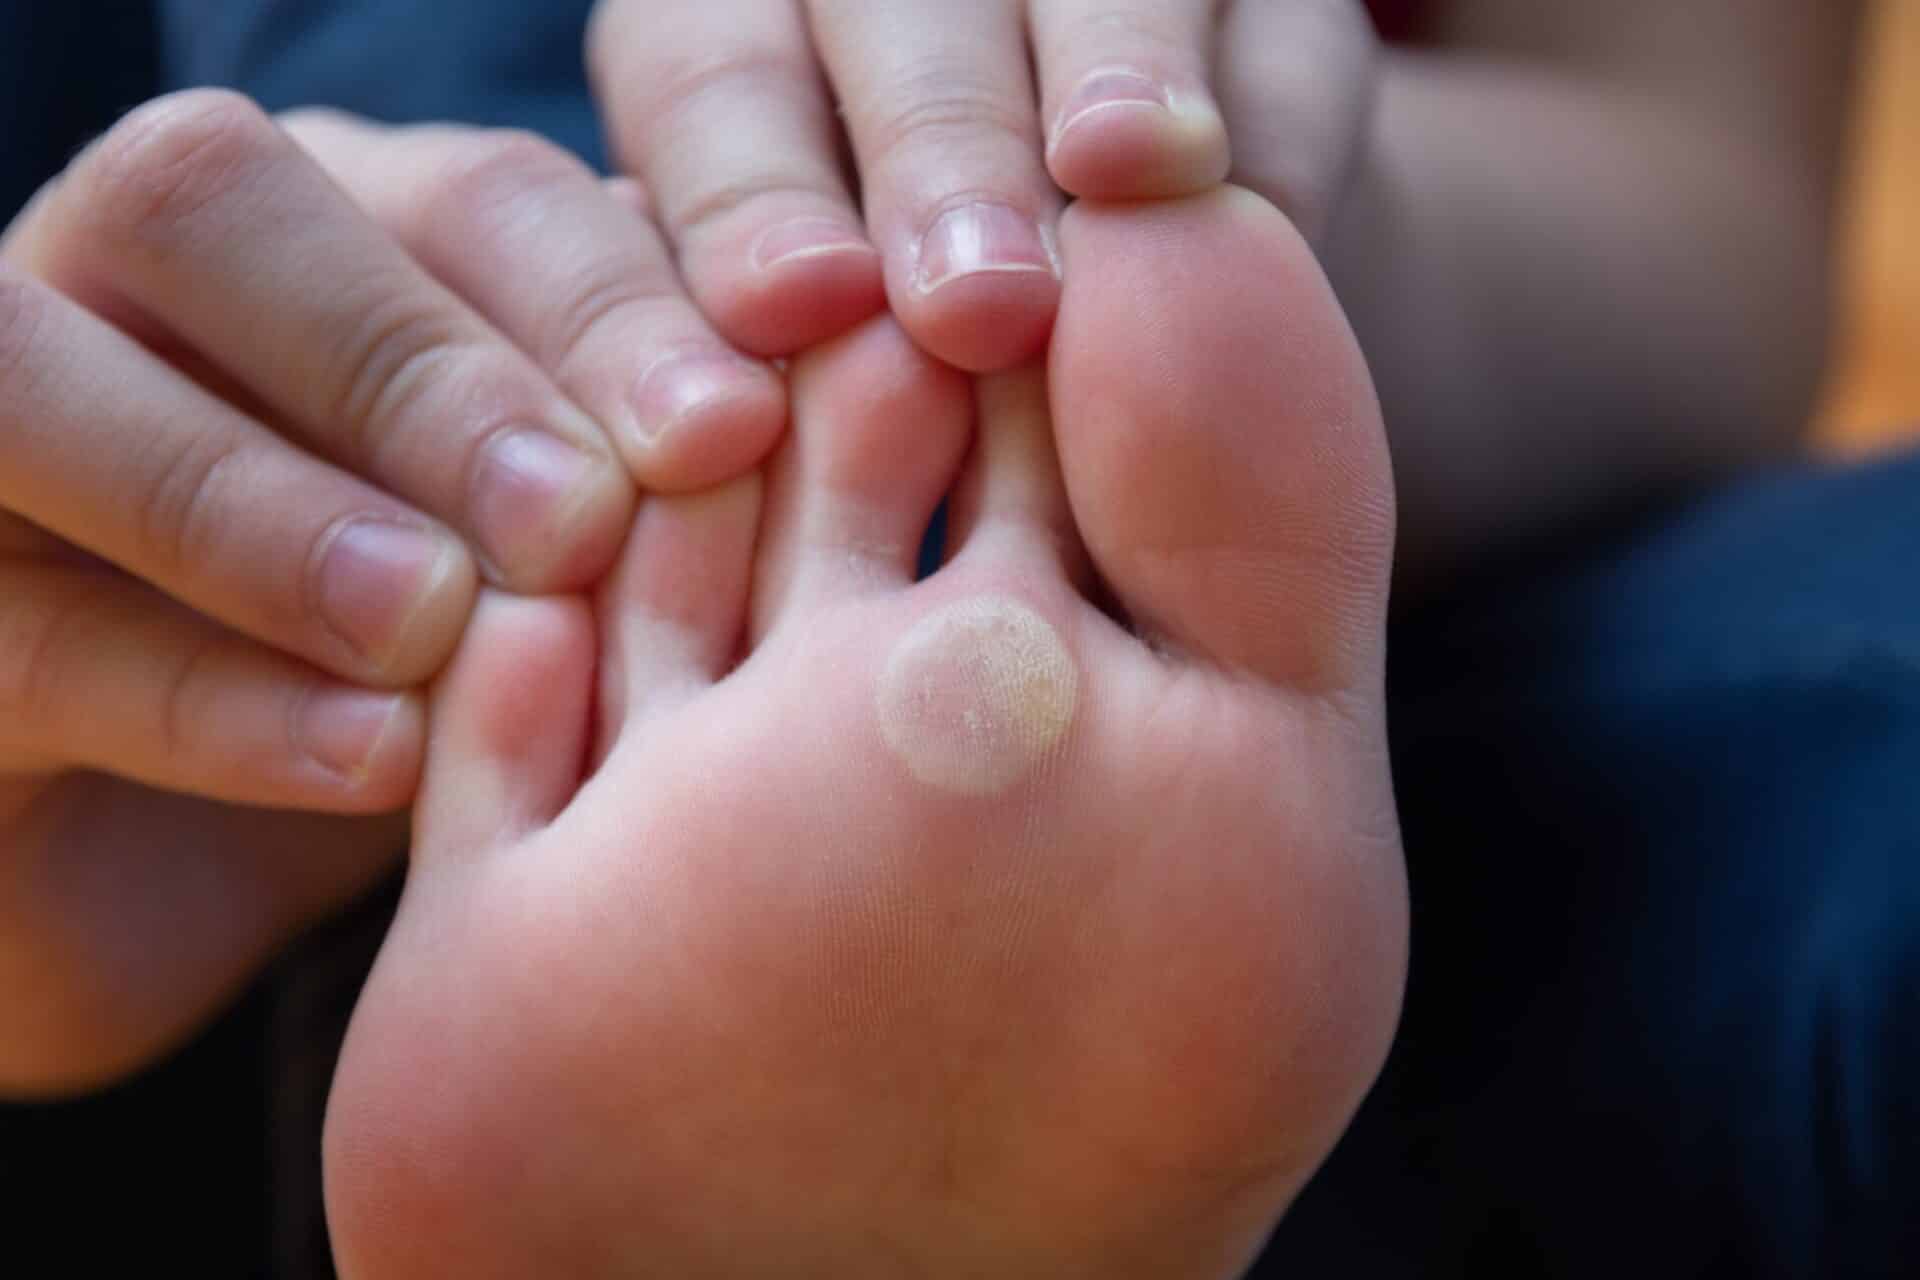 https://feetfirstclinic.com/wp-content/uploads/What-are-corns-and-calluses-treatment-and-prevention-2-scaled-1-1920x1280.jpg